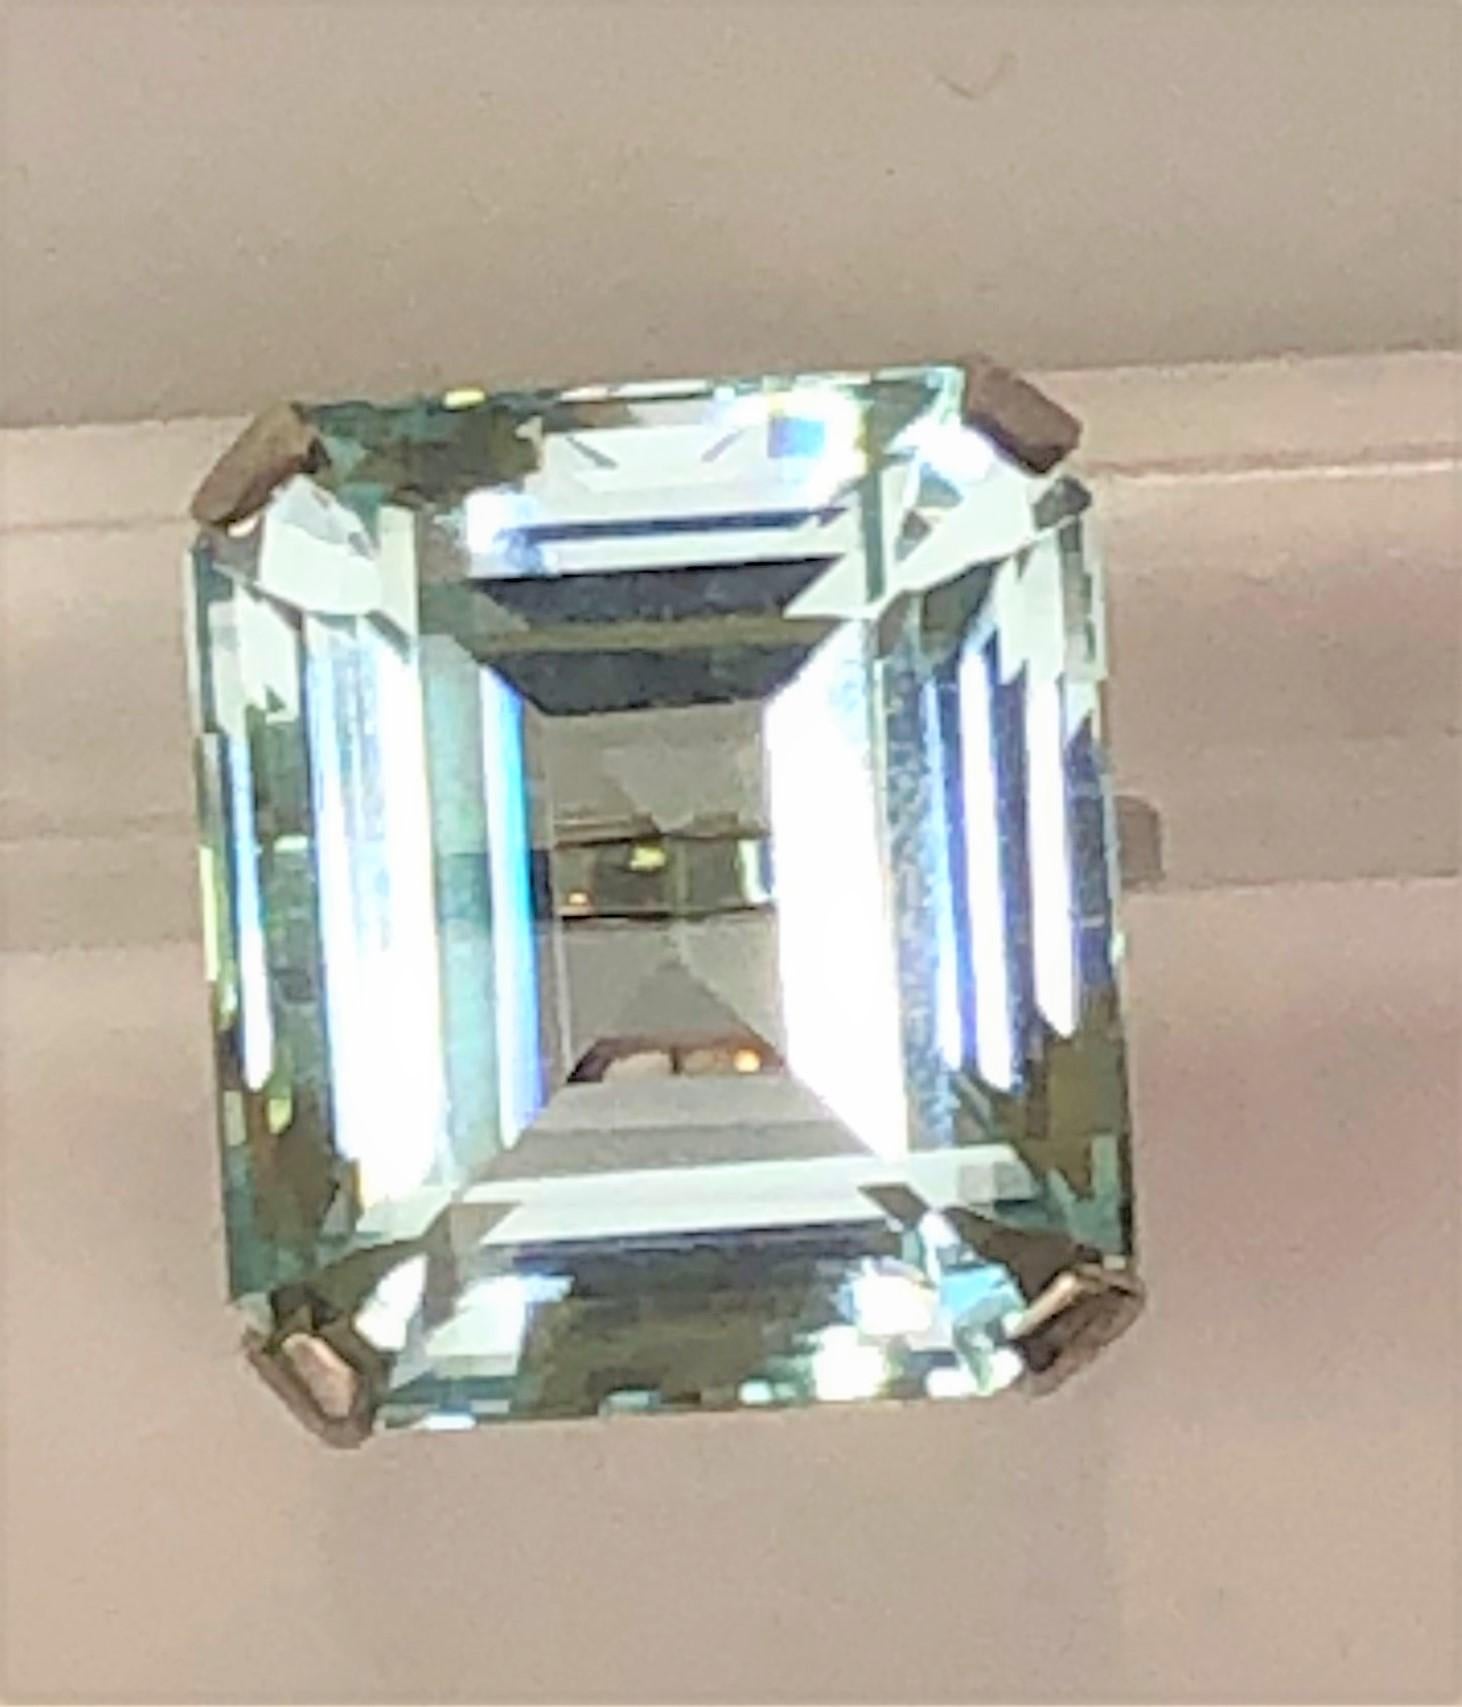 This ring will definitely get noticed for it's beautiful color and shine!
14 karat white mounting
Approximately 30 carat blue, emerald cut aquamarine in a decorative basket setting
Stone measures approximately 20.6mm x 18.4mm x 12.3mm, approximately